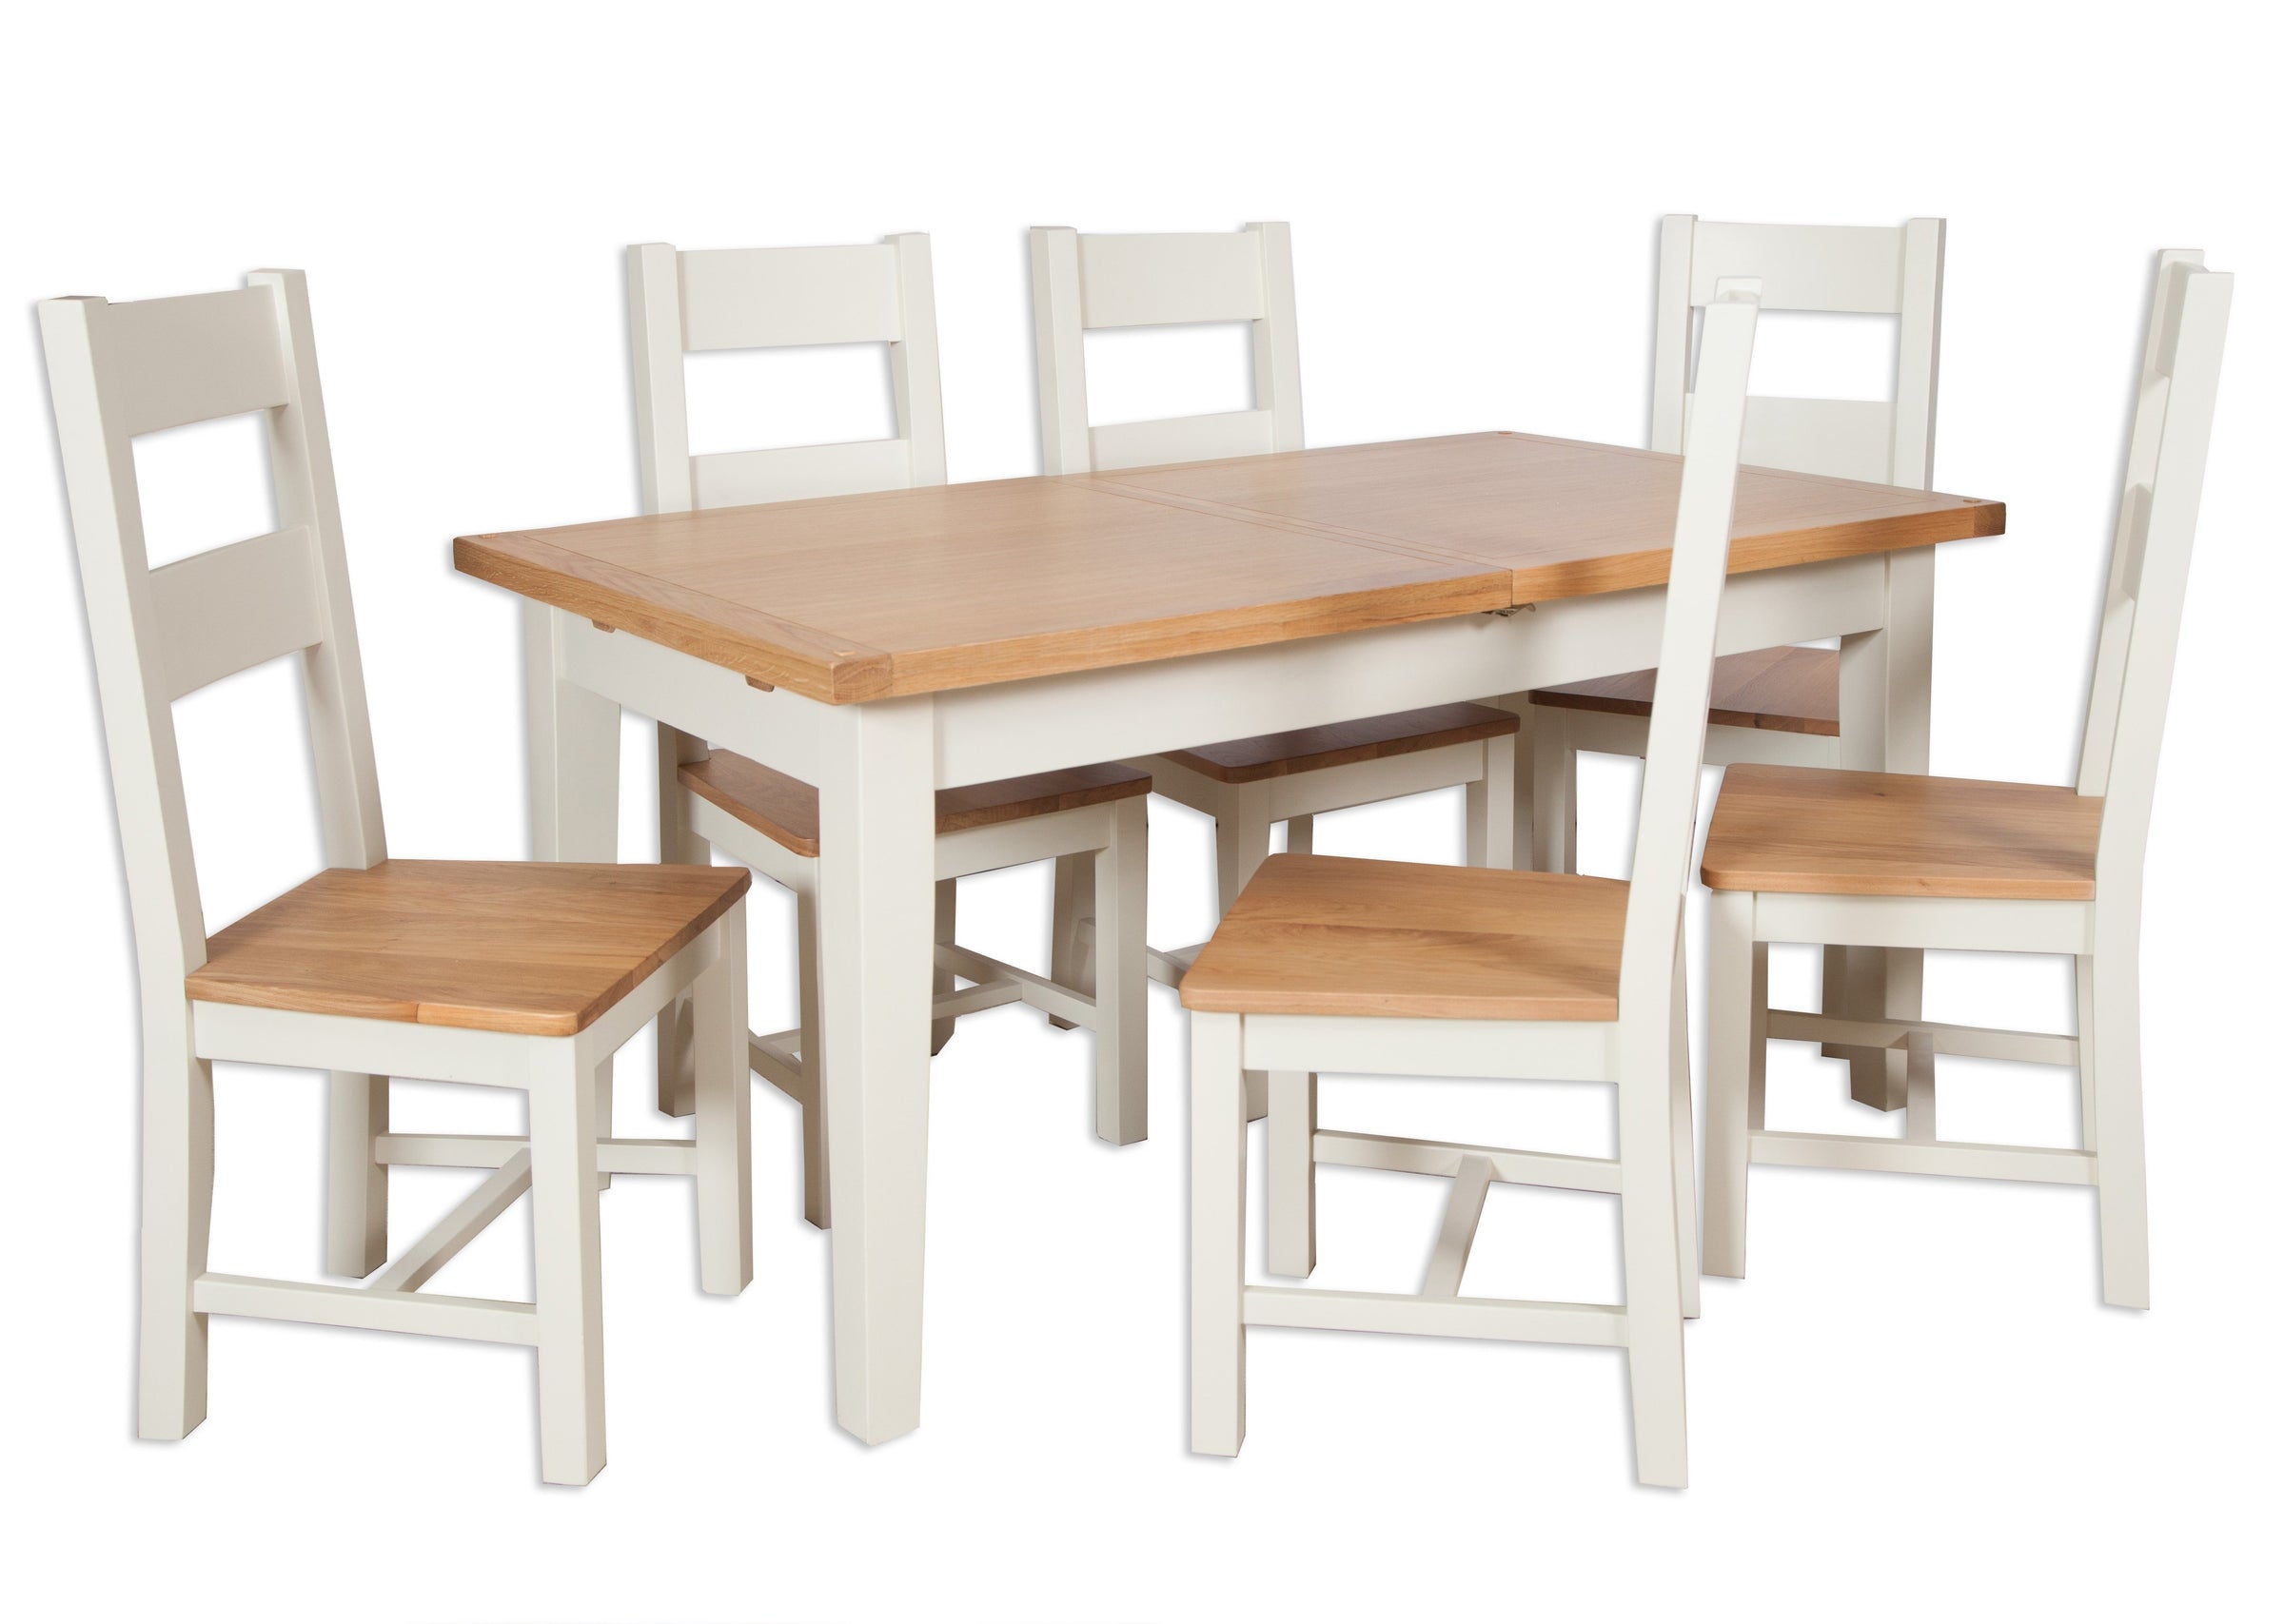 Oakwood Living Ivory Painted Oak 12 Extending Dining Table Furniture For The Home